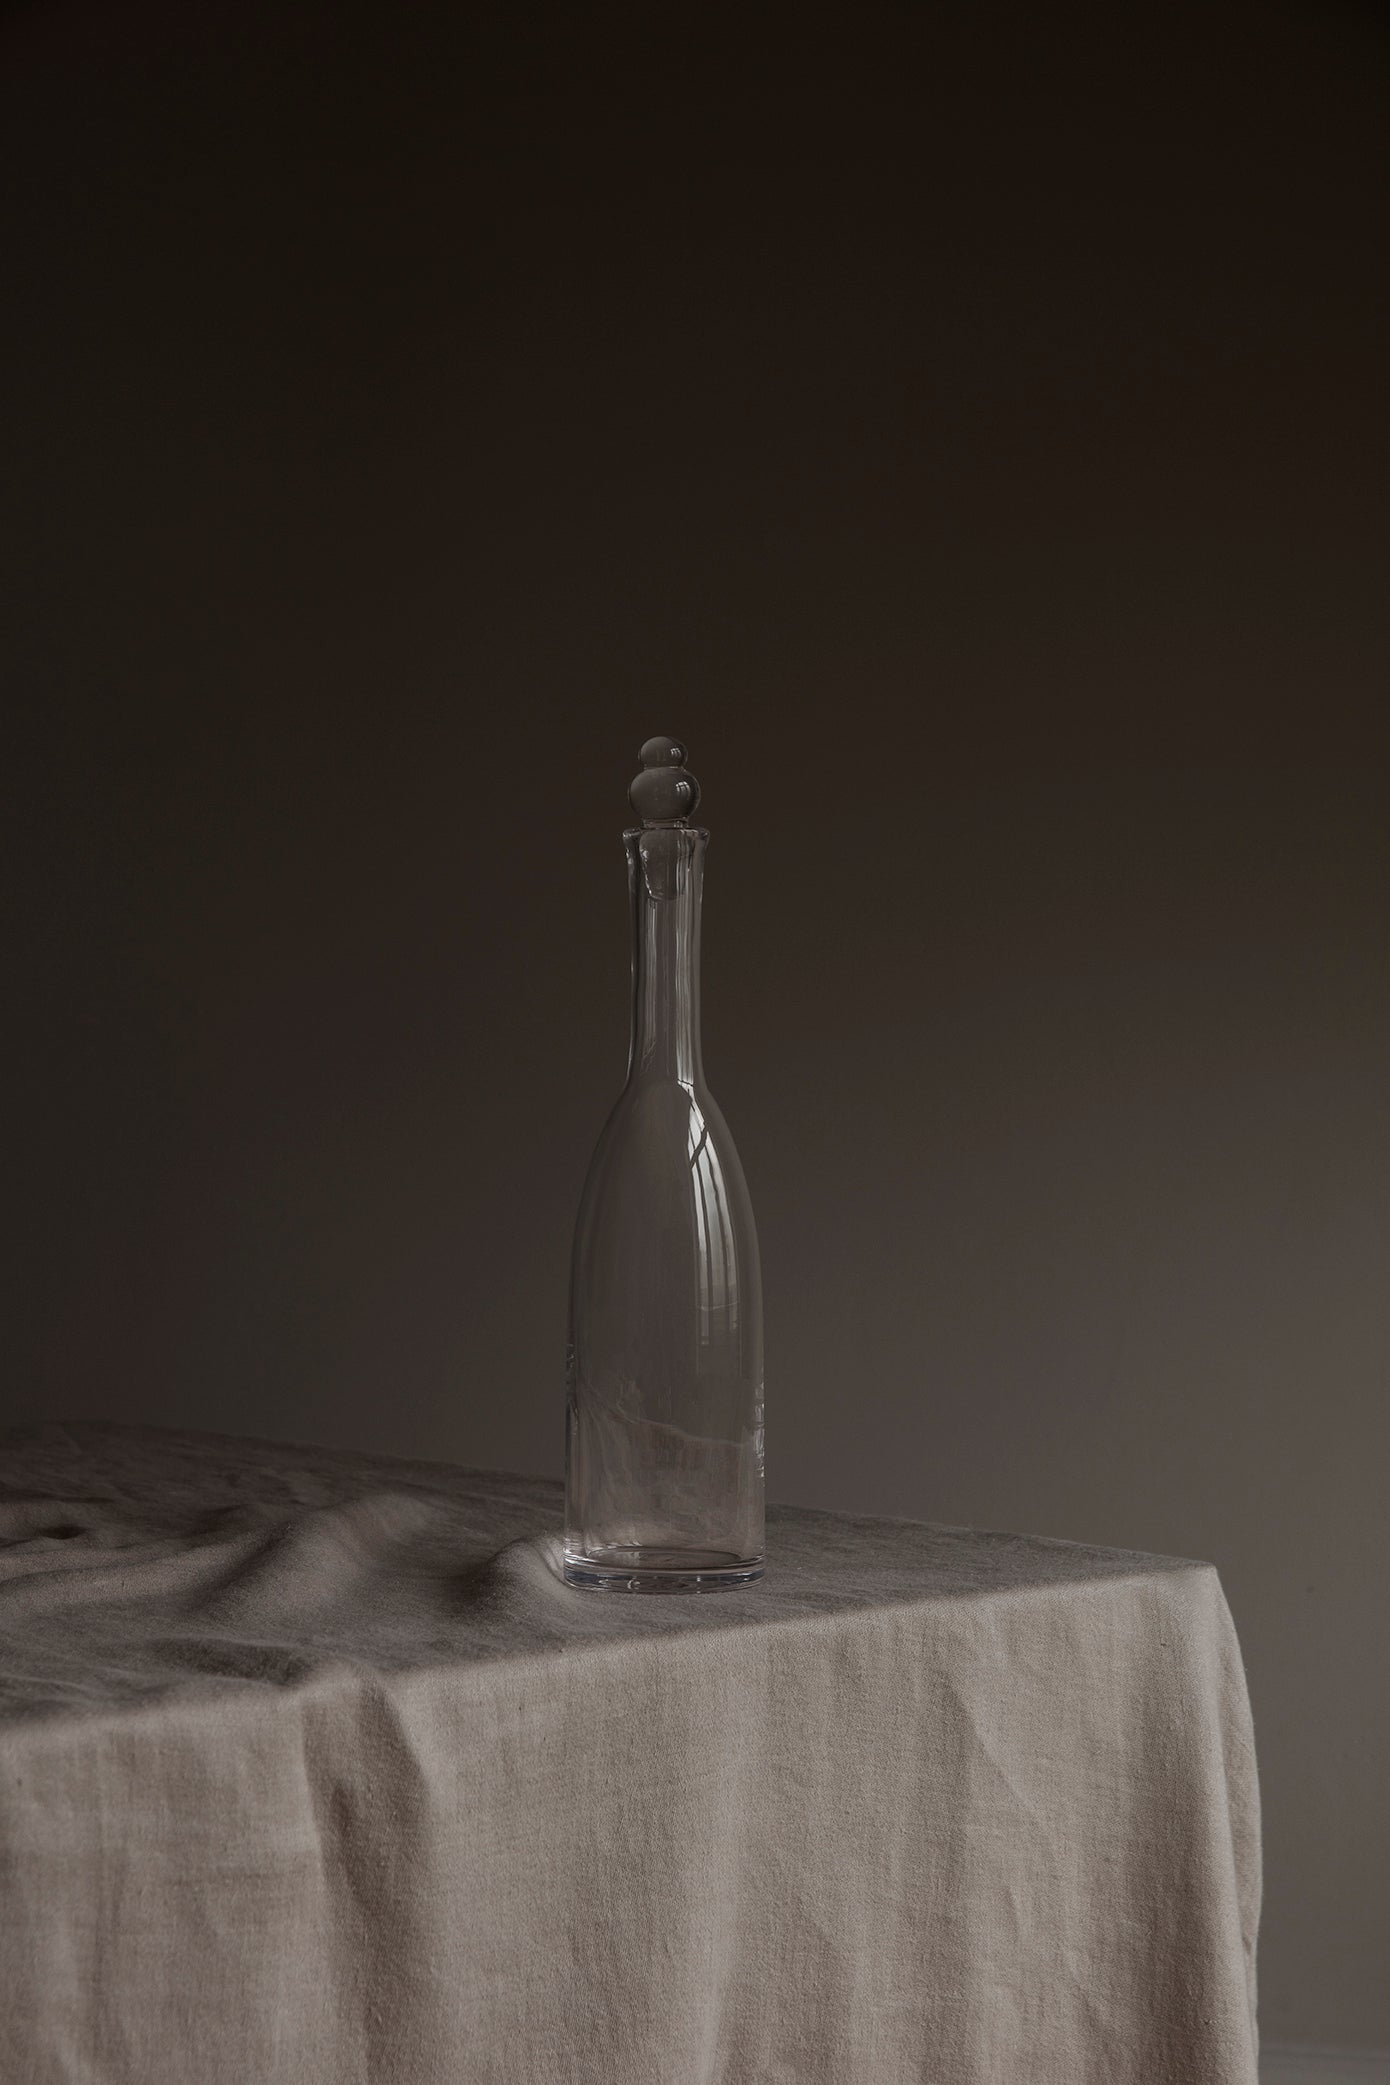 GLASS BOTTLE WITH STOPPER